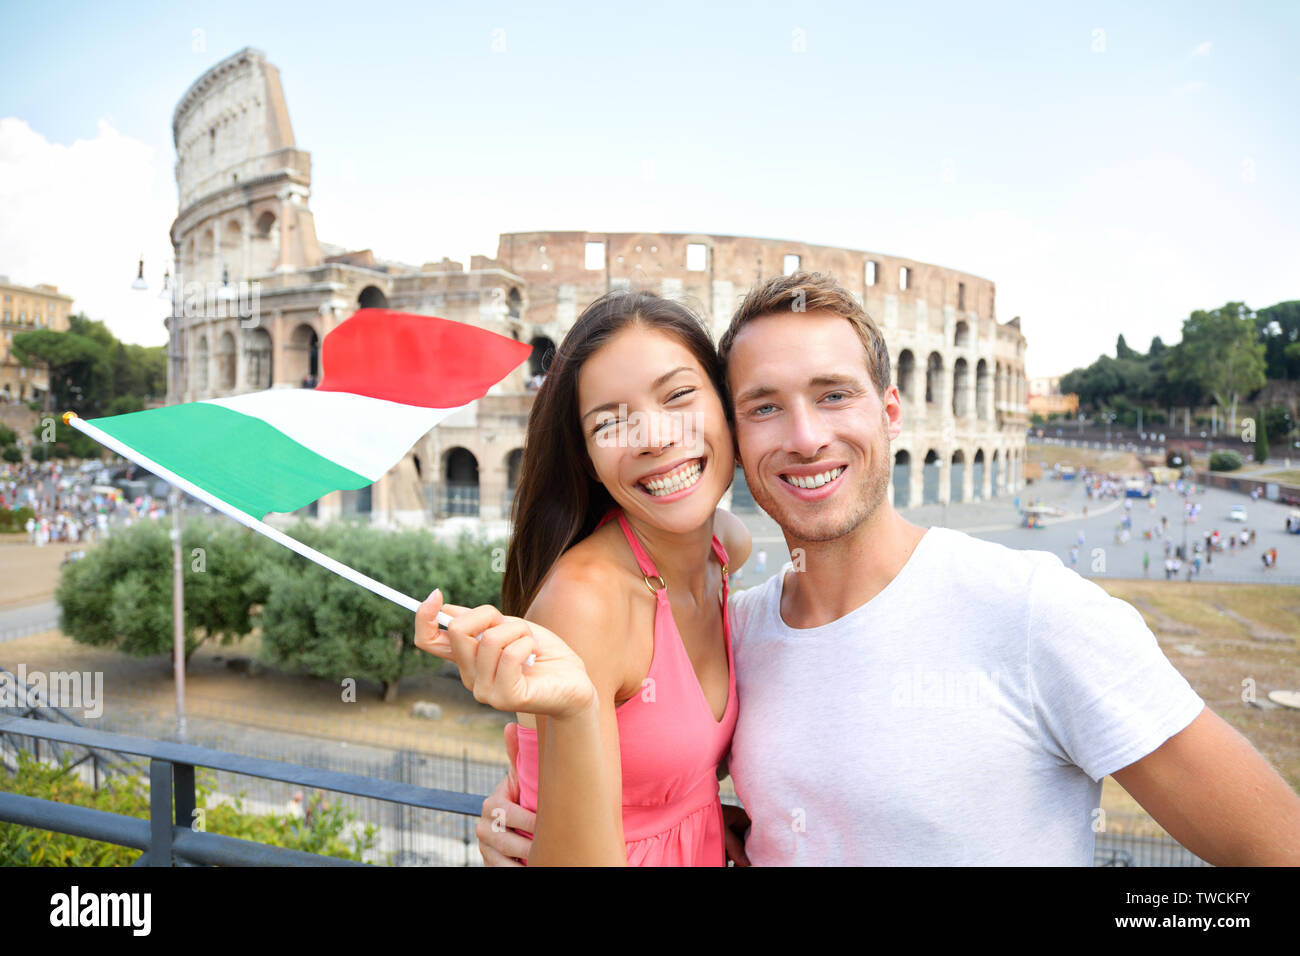 Italy travel couple with Italian flag by Colosseum embracing. Happy tourists lovers on honeymoon sightseeing having fun in front of Coliseum. Love and tourisn concept with multiracial couple. Stock Photo